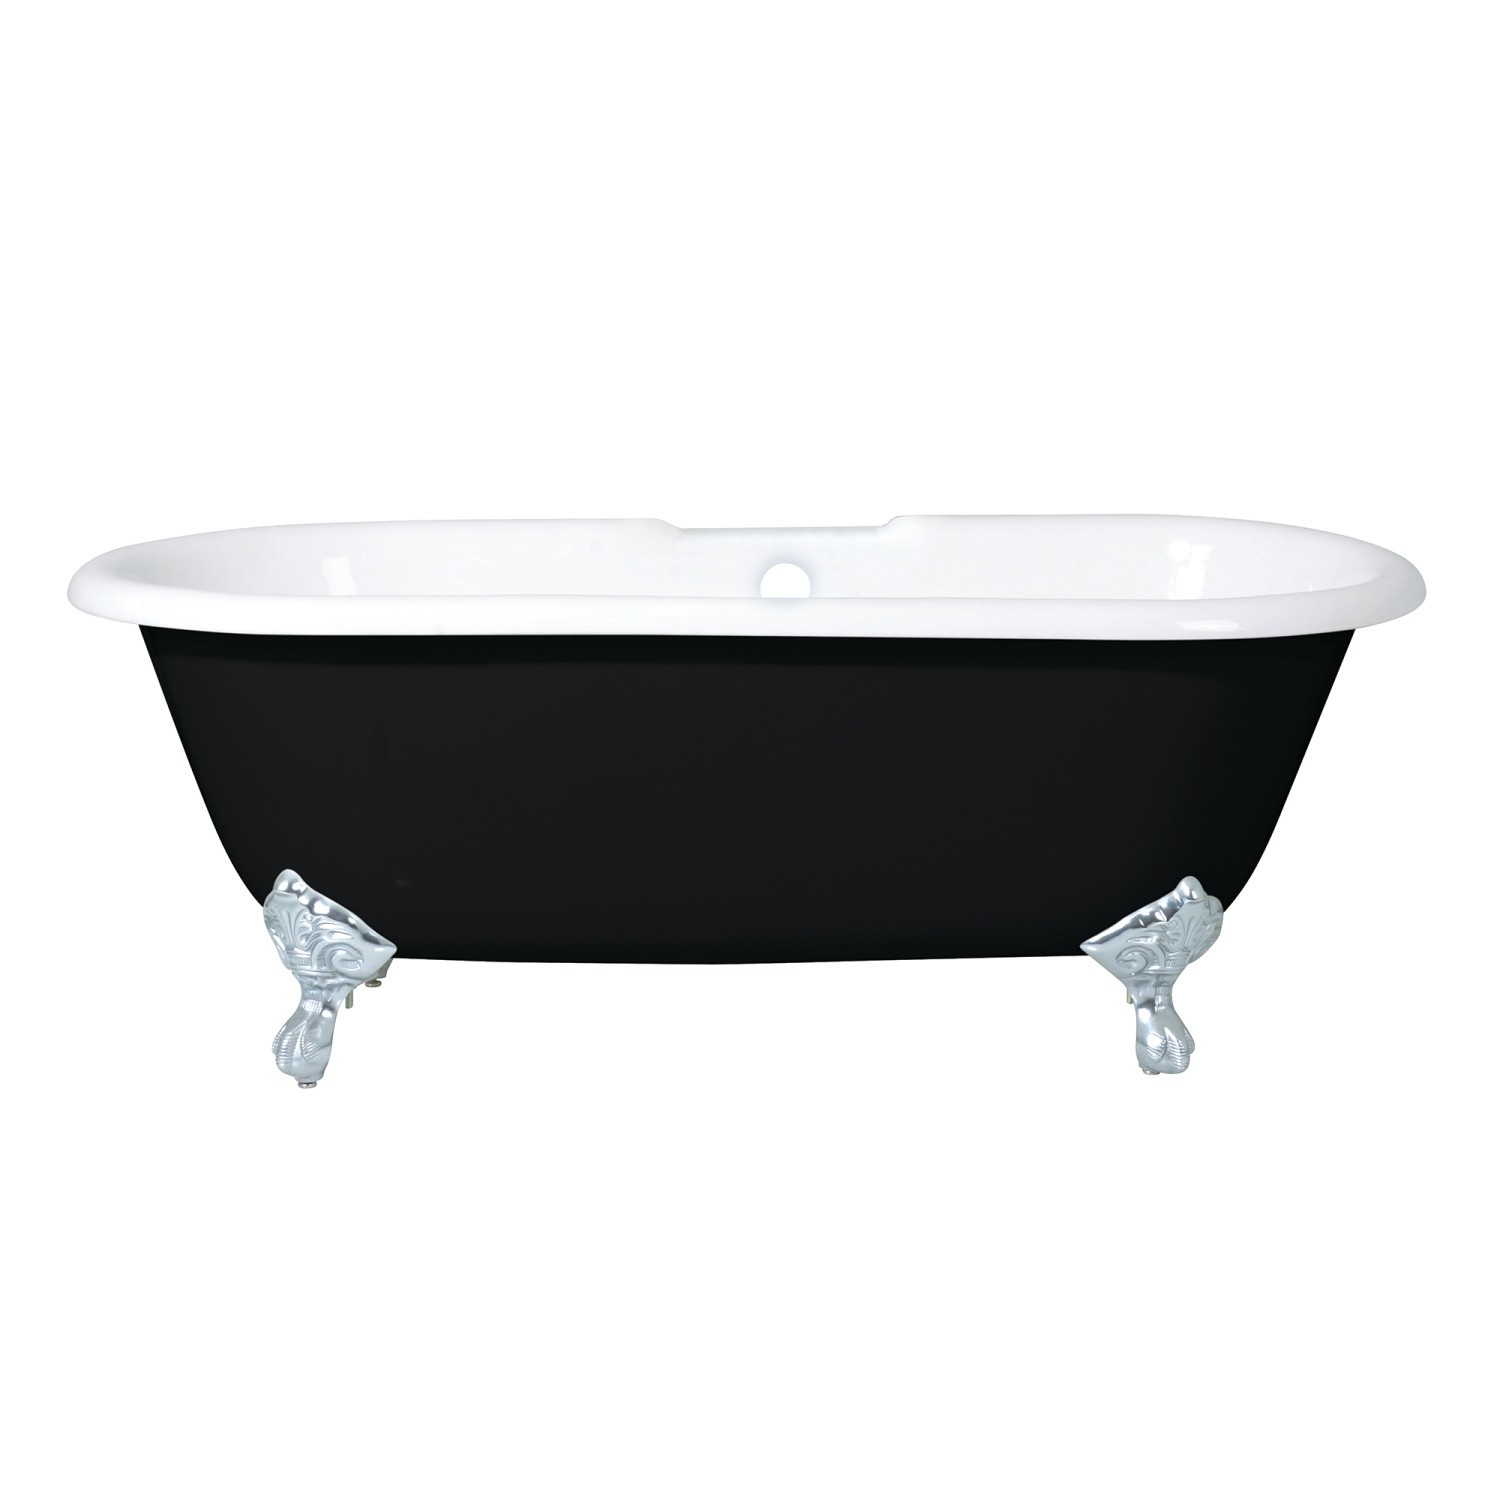 KINGSTON BRASS VBT7D663013NB AQUA EDEN 66 INCH DOUBLE ENDED CLAWFOOT TUB WITH 7 INCH FAUCET DRILLINGS AND FEET